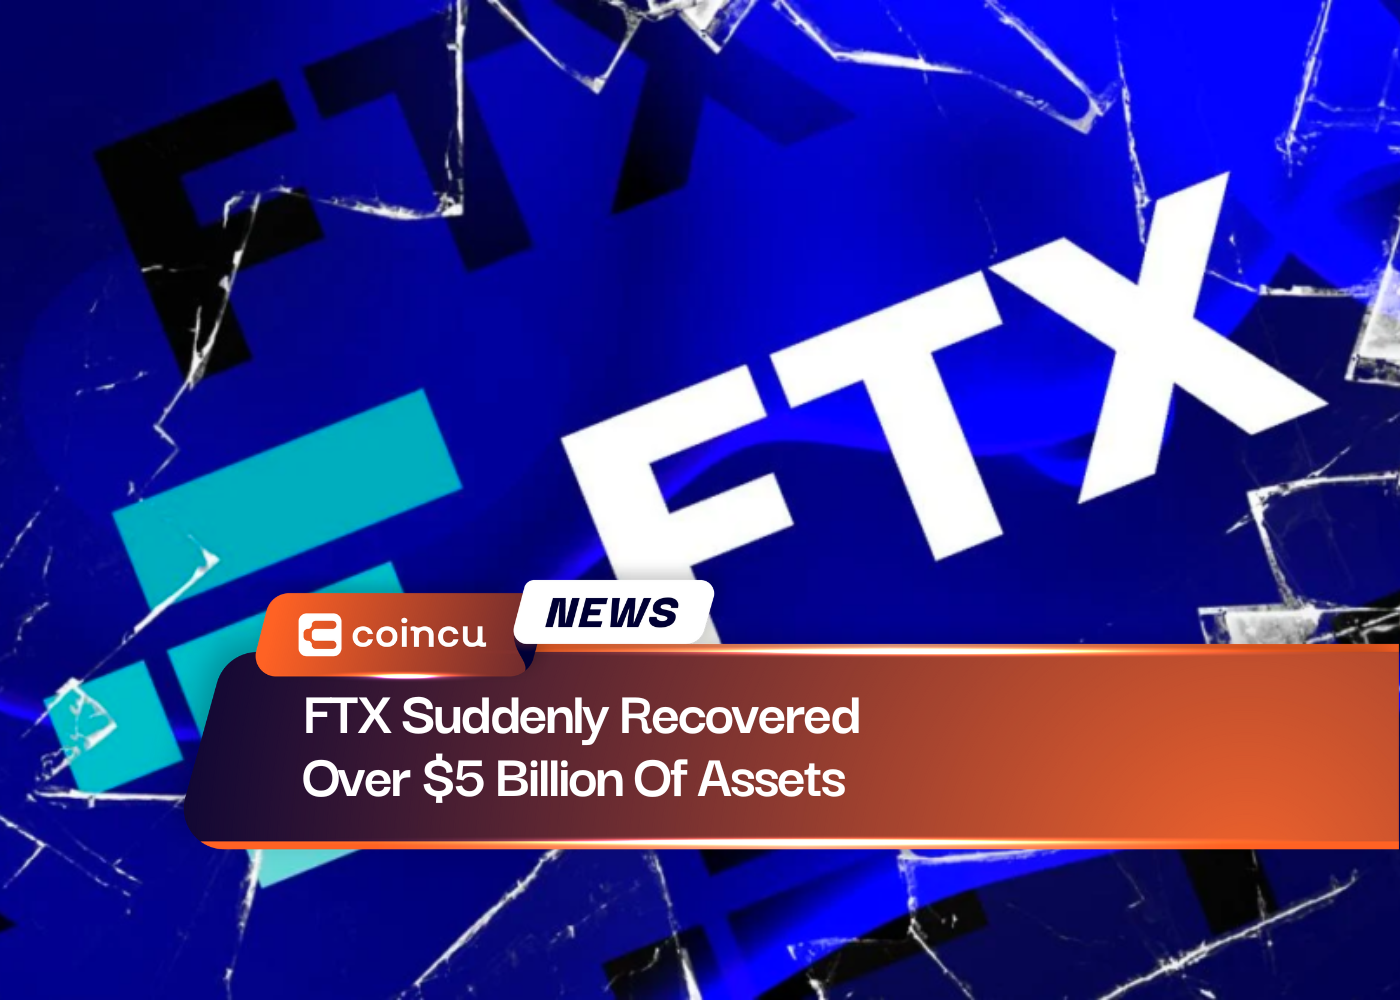 FTX Suddenly Recovered Over $5 Billion Of Assets